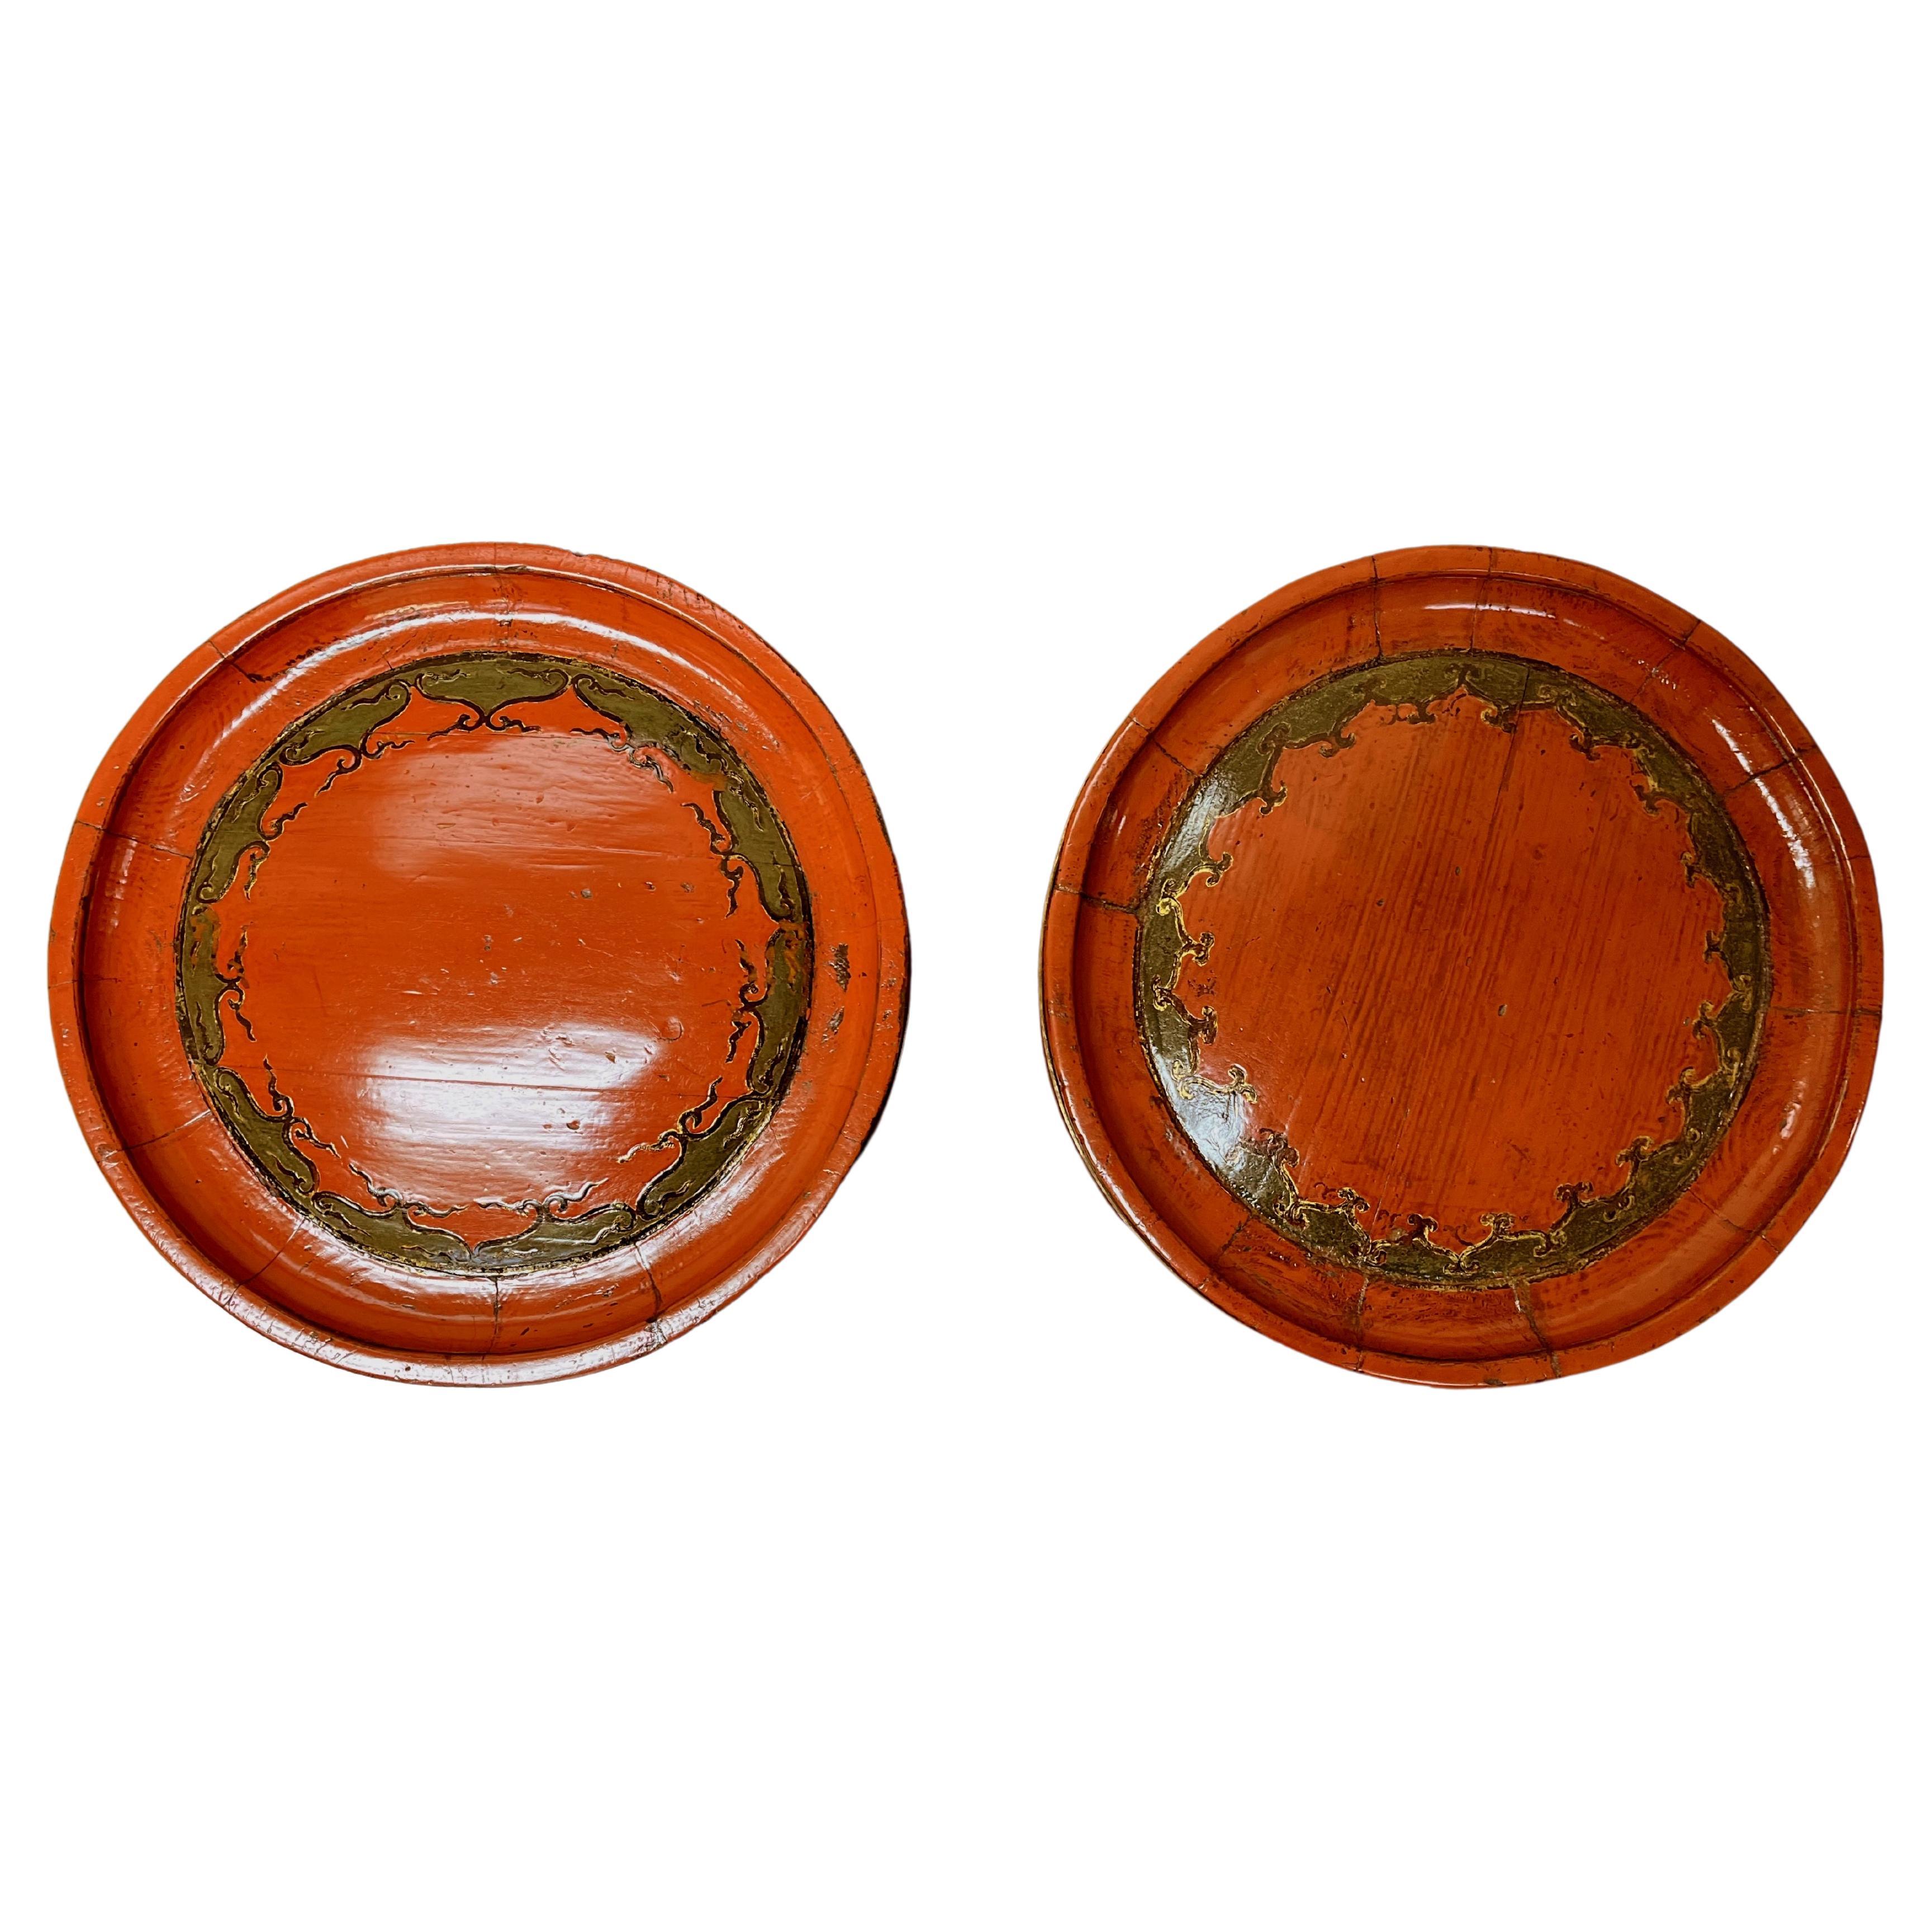 Two Asian Red Lacquer Wedding Round Wooden Plates